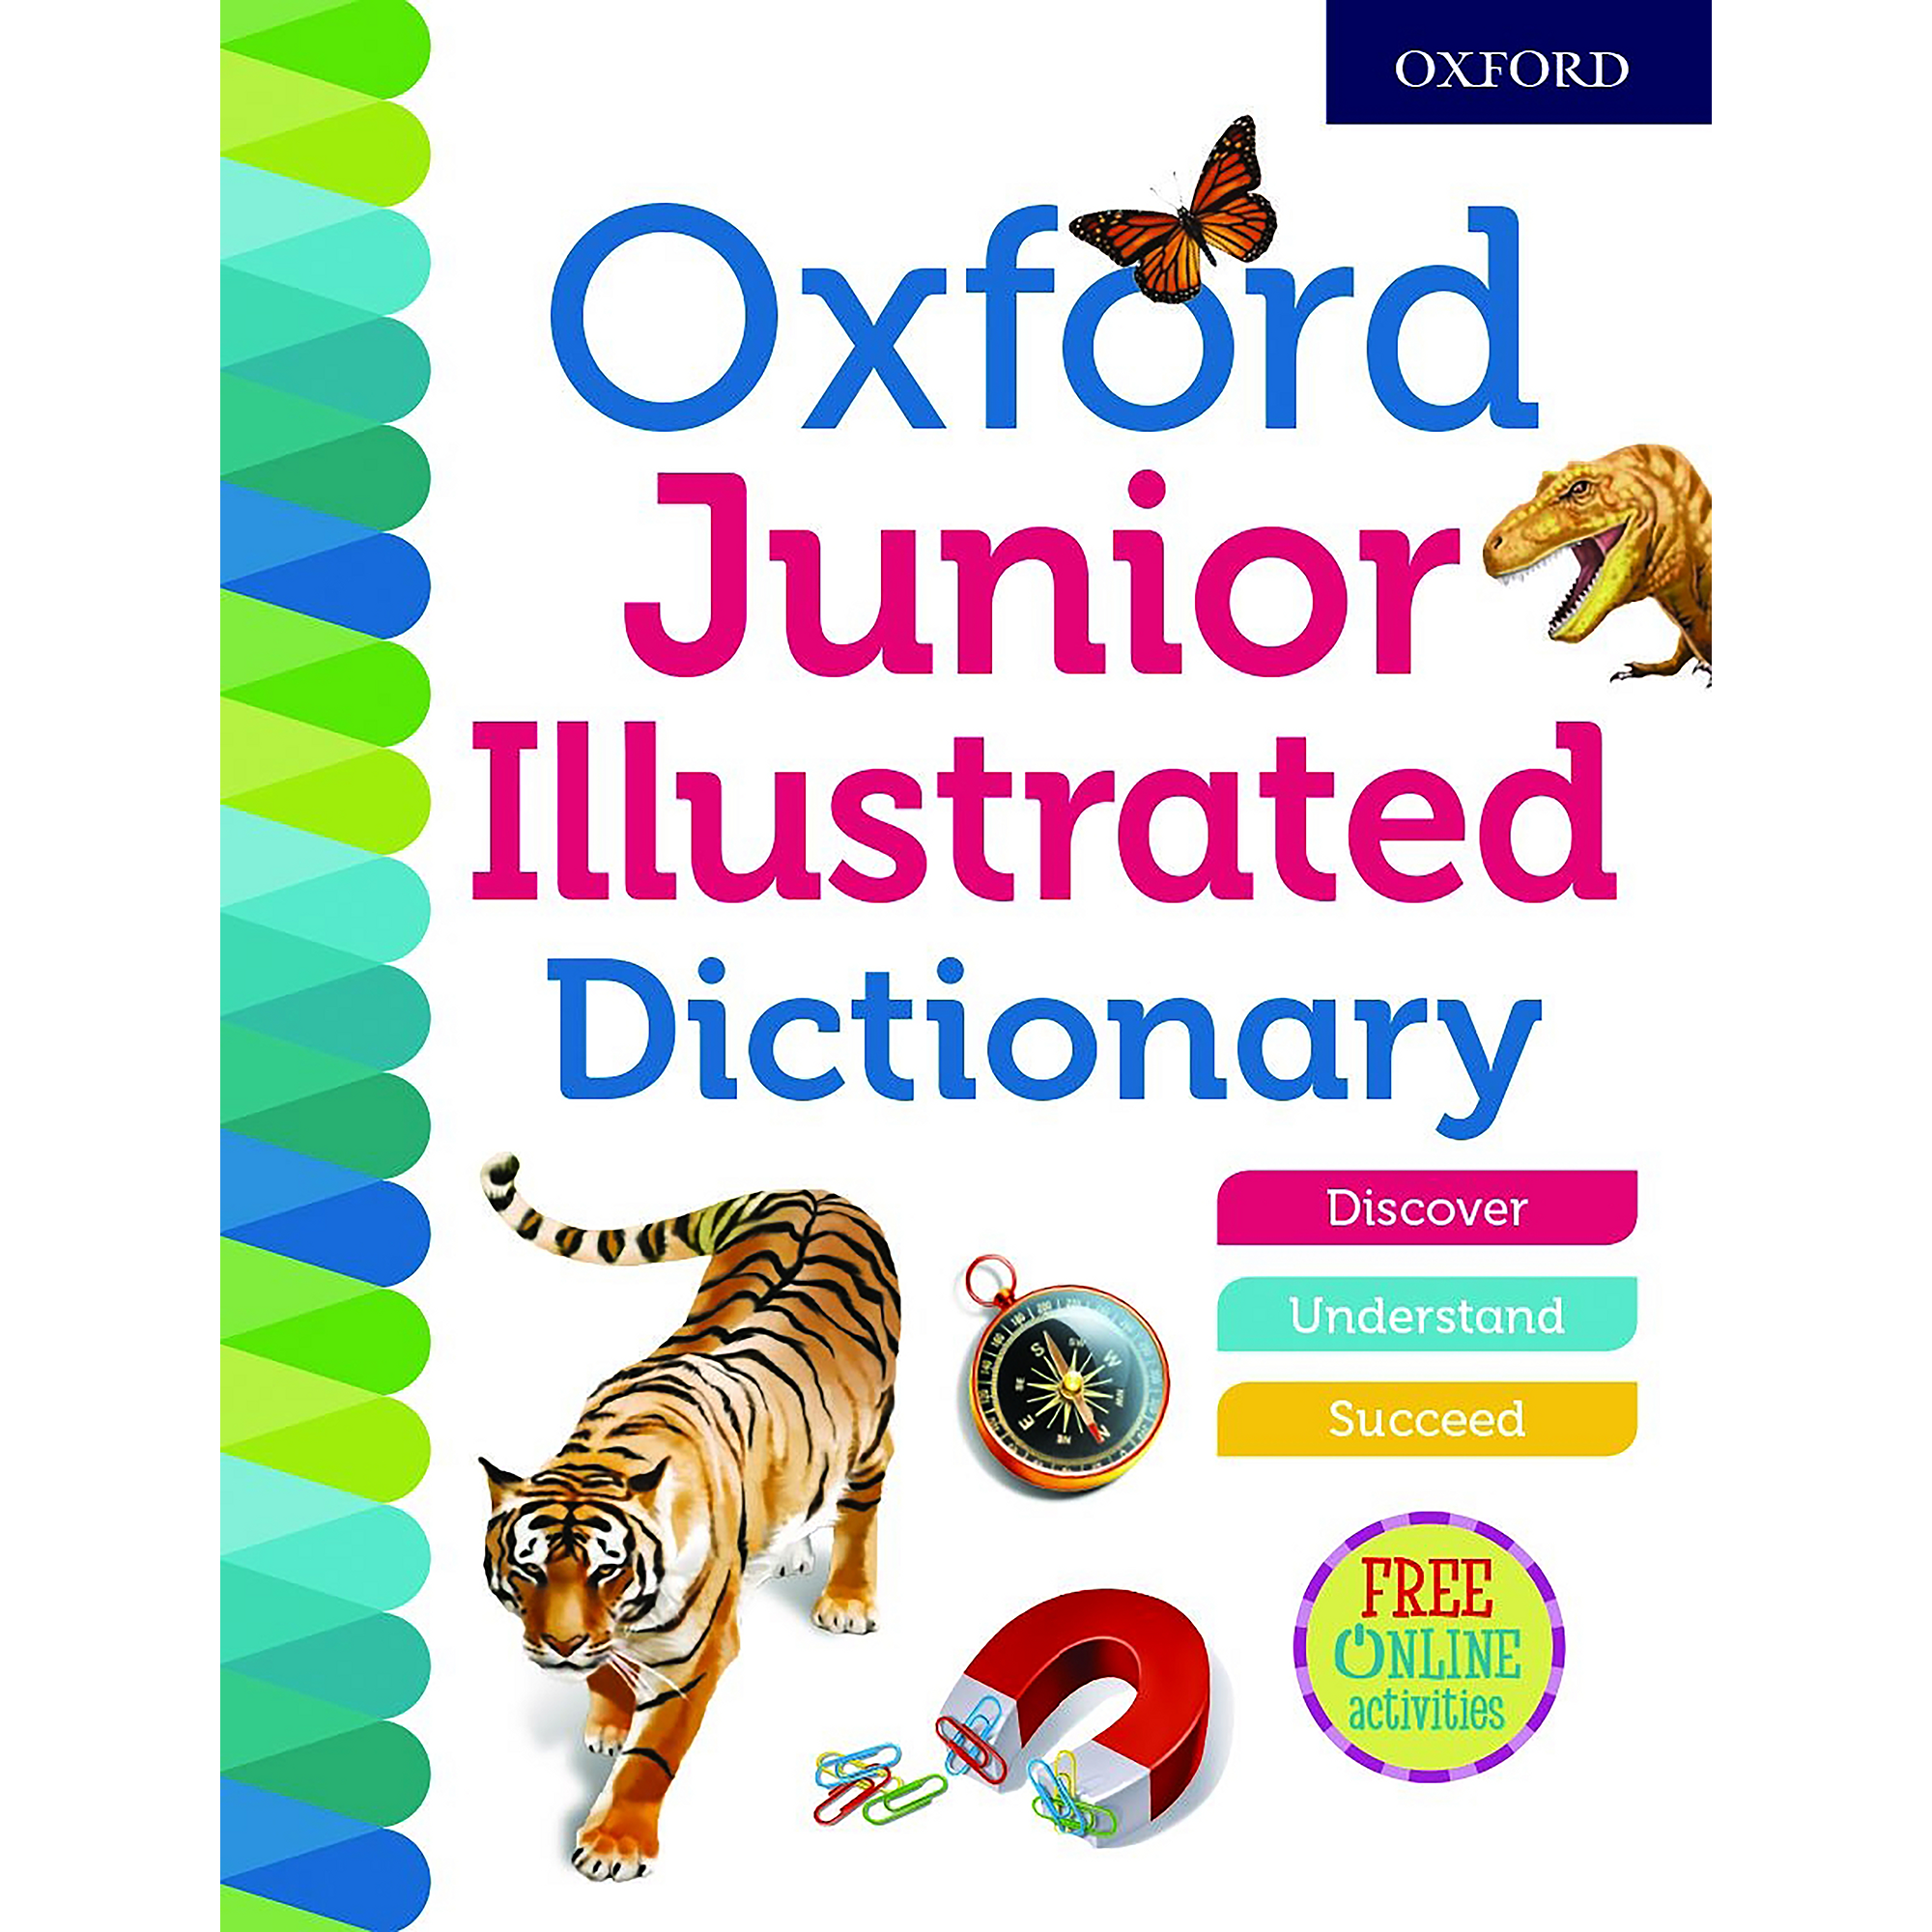 Dictionary　W1004364　Educational　Oxford　Junior　GLS　Illustrated　Supplies